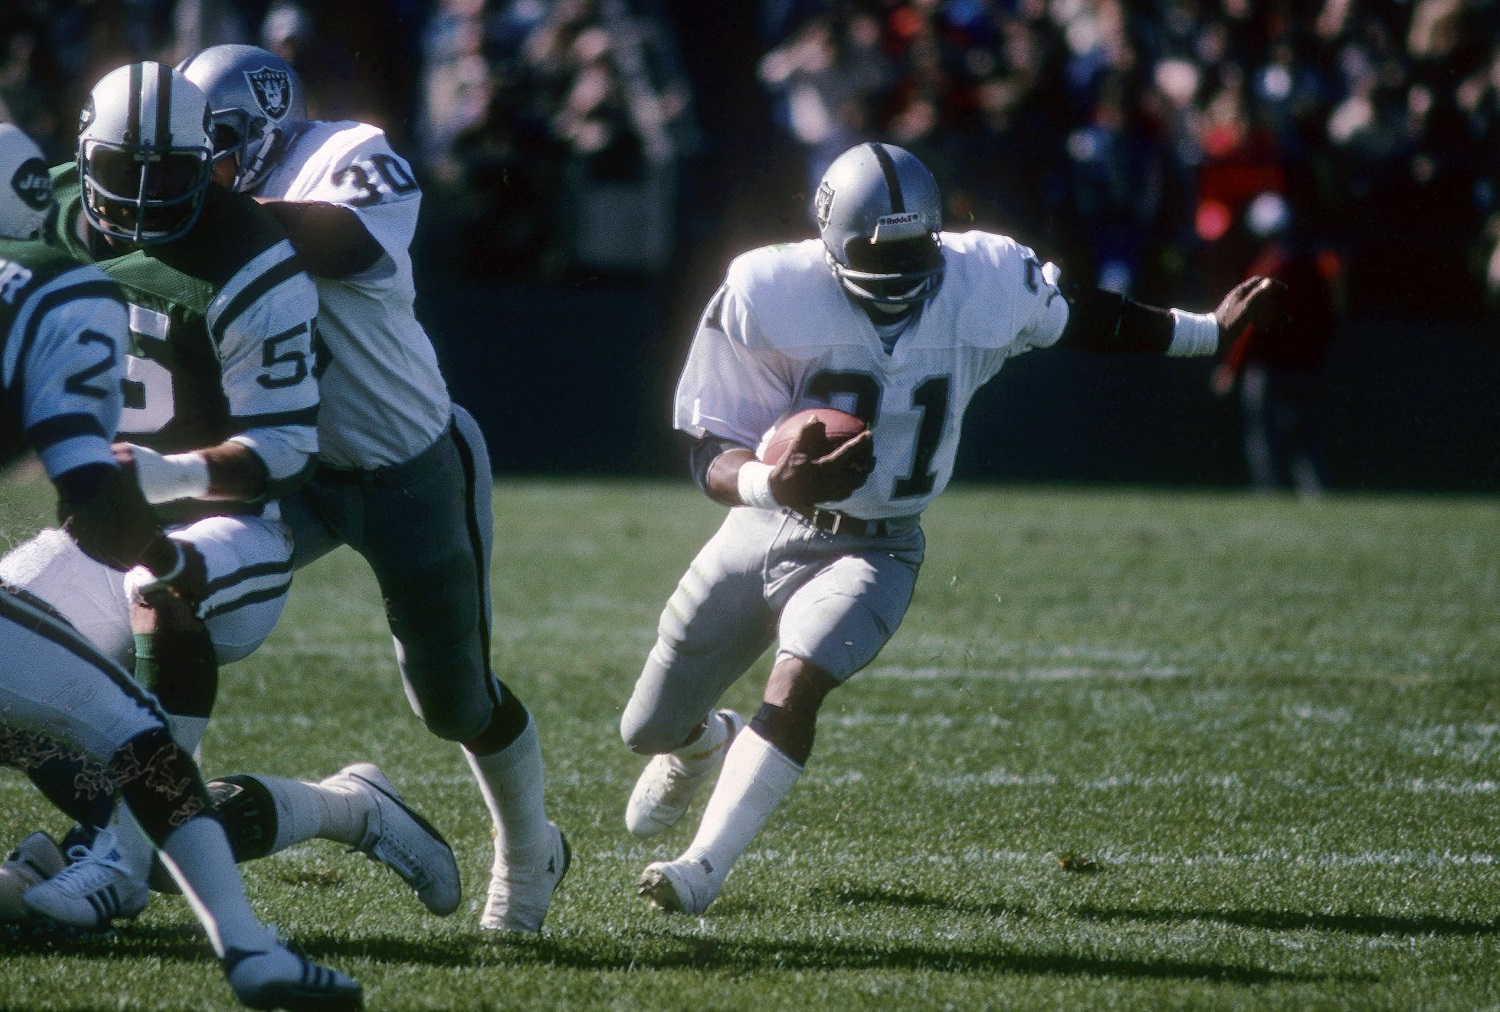 Oakland Raiders wide receiver Cliff Branch was the perfect receiver for the Oakland Raiders' style of aggressively challenging secondaries by throwing deep down the field. He made thee consecutive All-Pro teams, which should be enough for more serious consideration by Pro Football Hall of Fame voters. | Focus on Sport/Getty Images